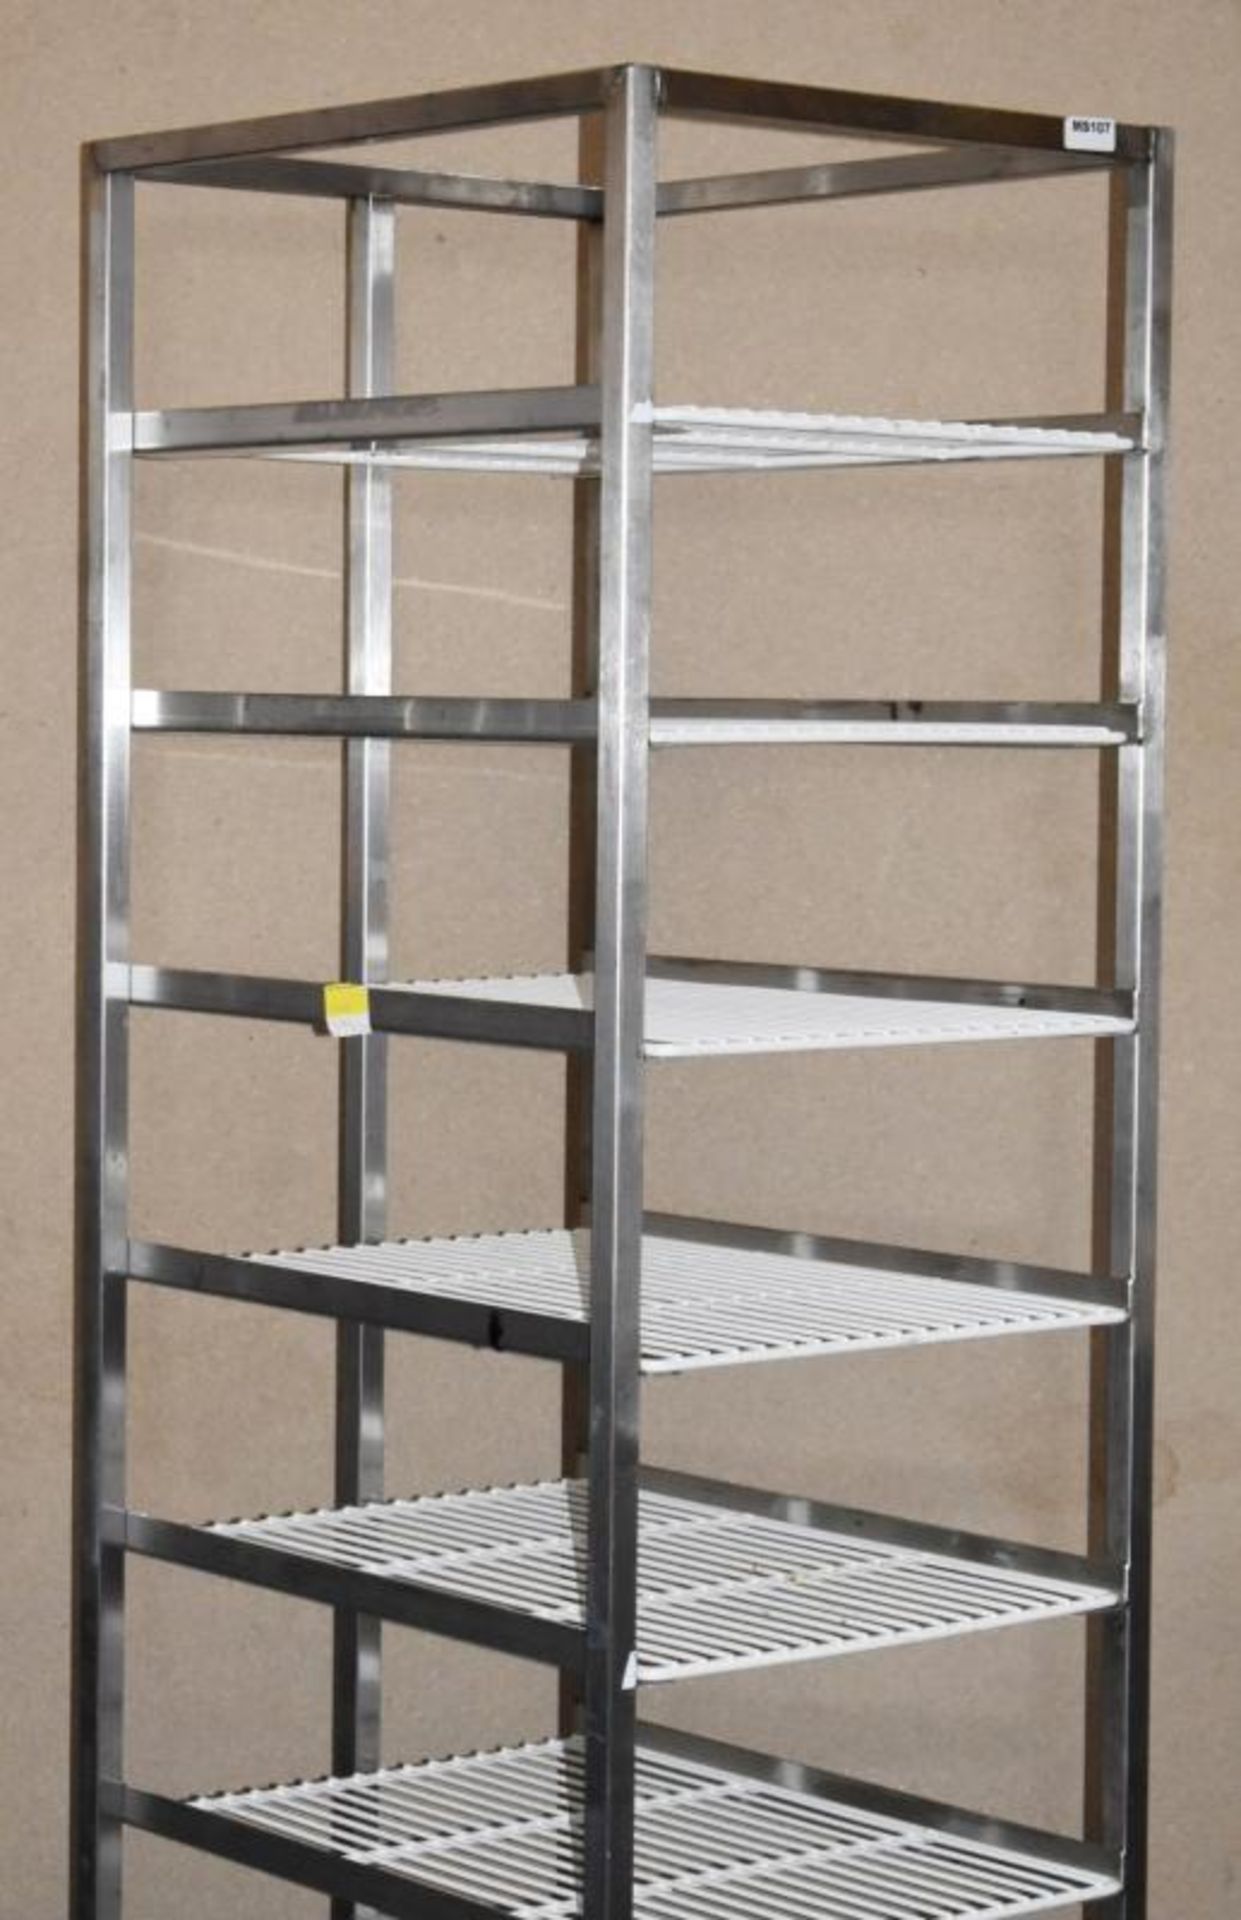 1 x Stainless Steel 8 Tier Mobile Shelf Unit For Commercial Kitchens With White Coated Wire Shelves - Image 6 of 11